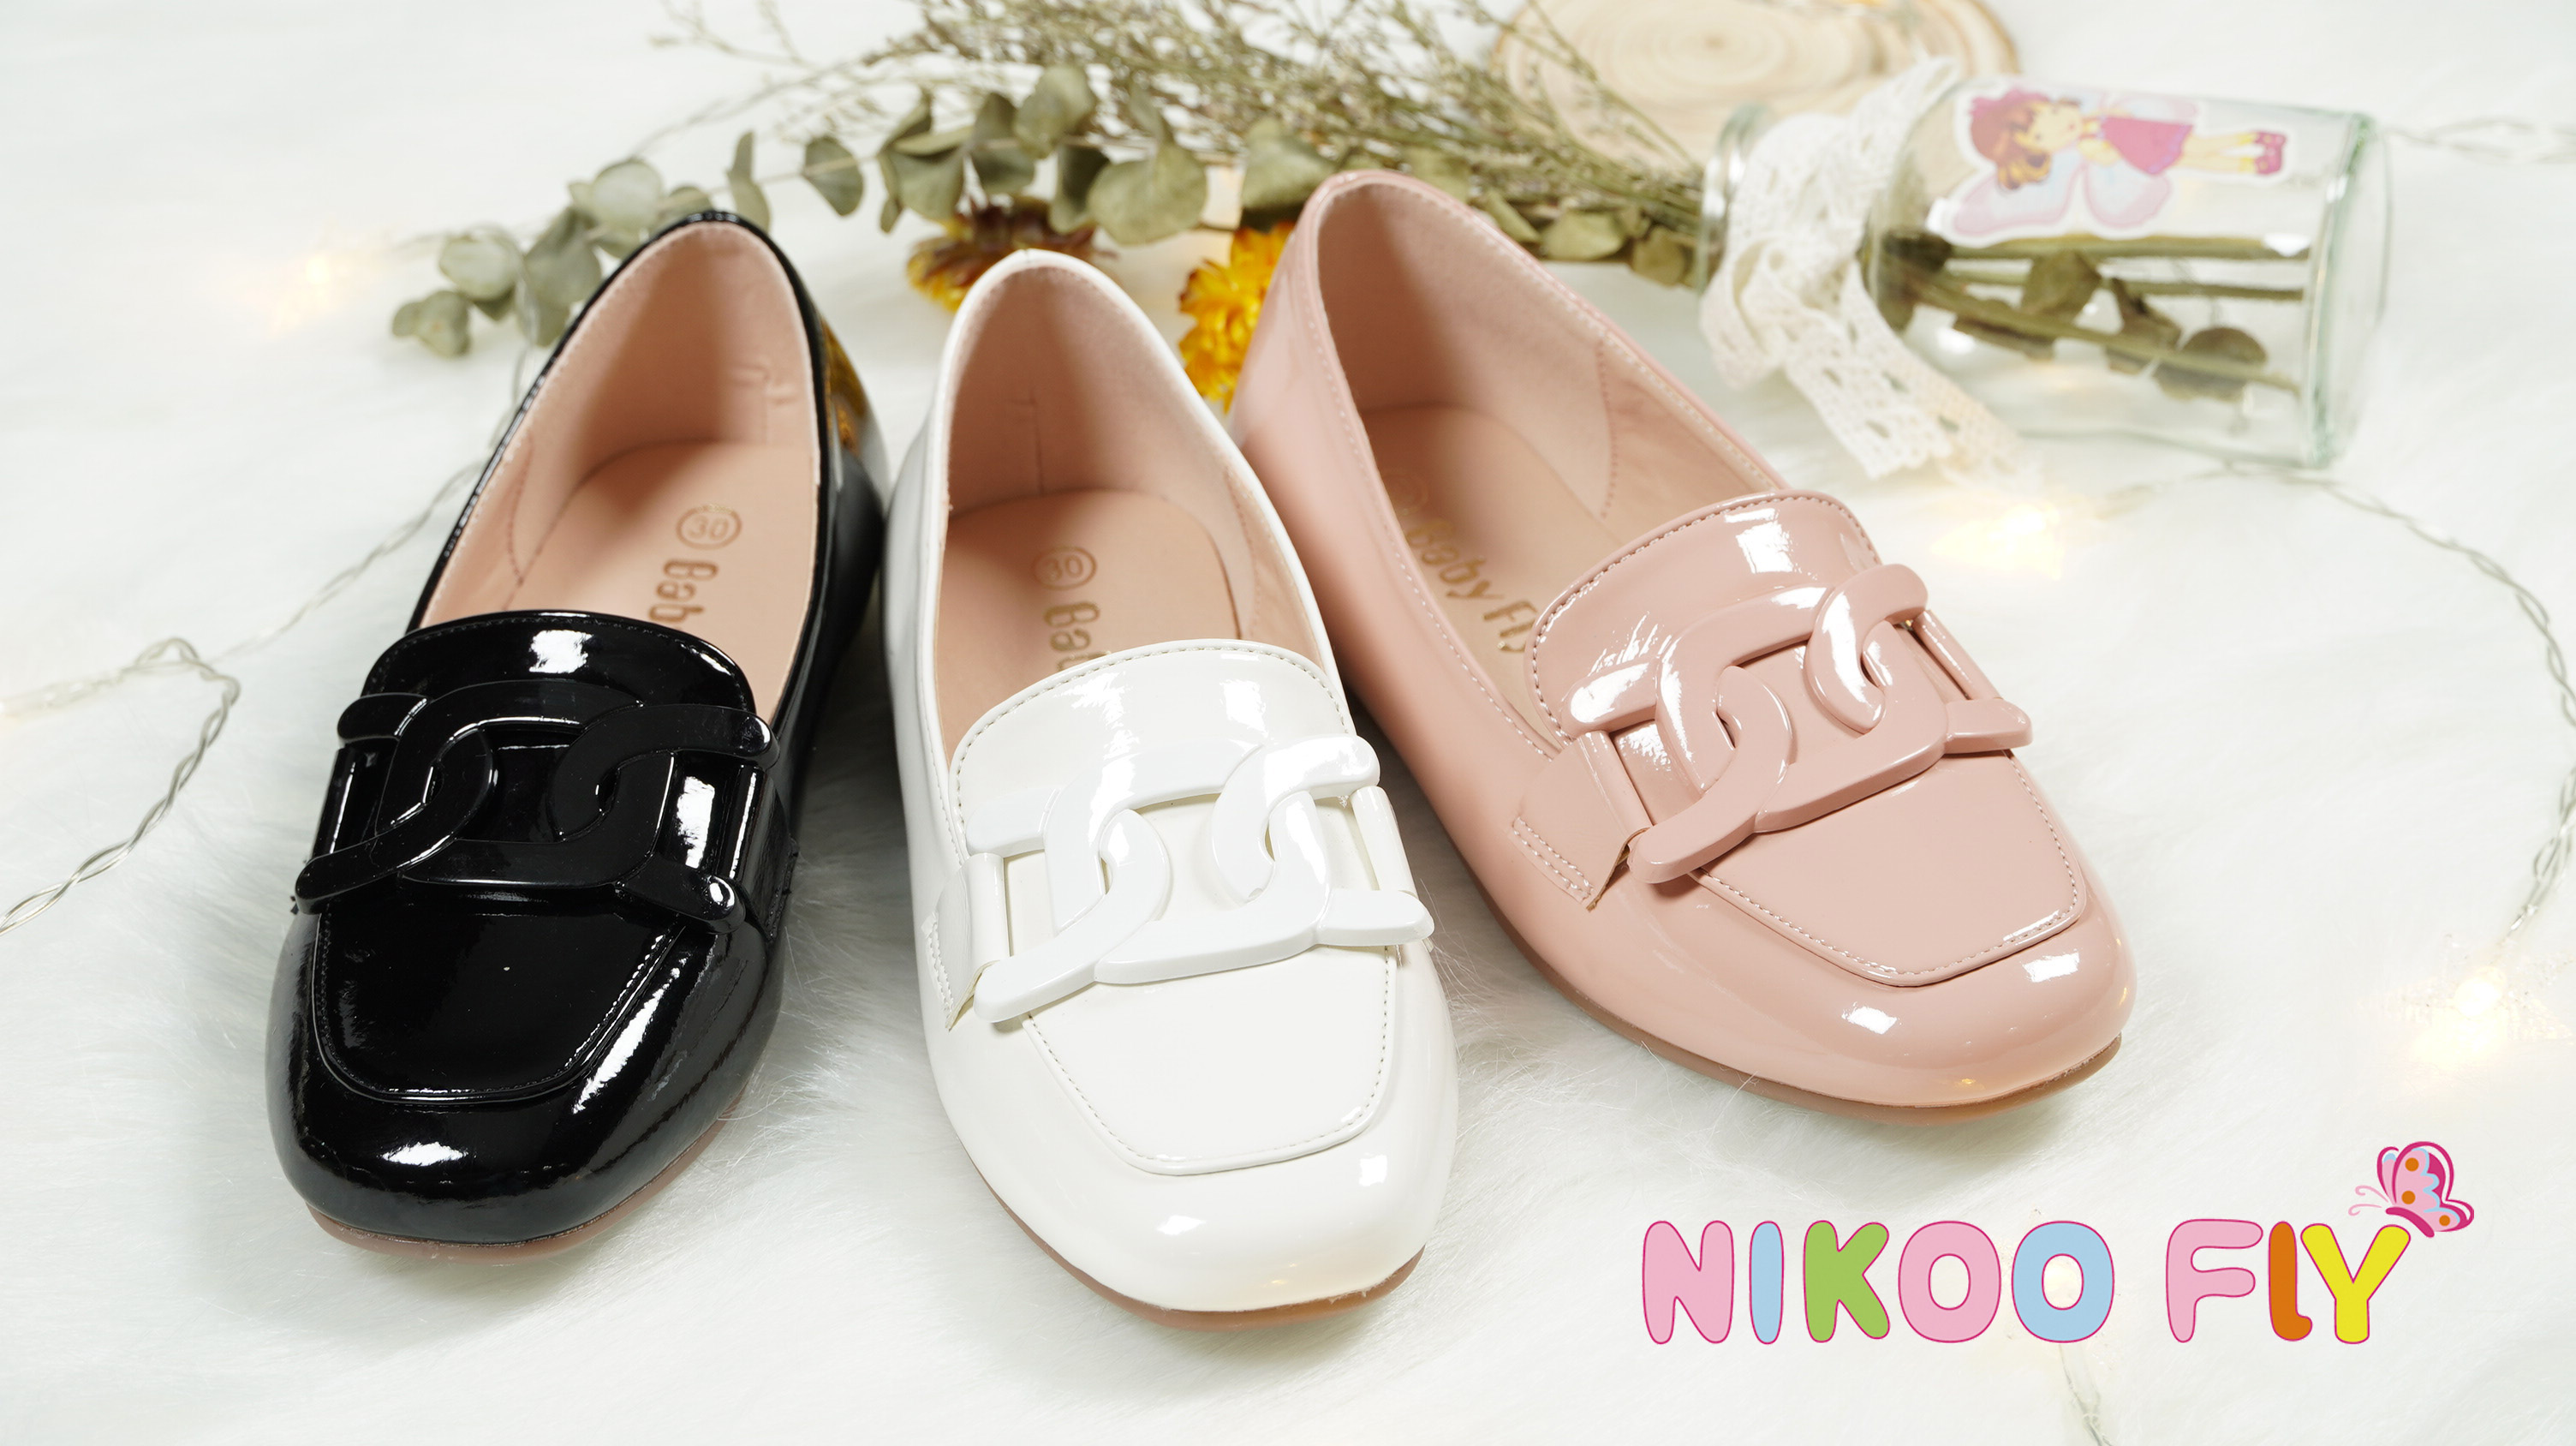 China-Wholesale-Export-Shoes-Nikoofly-Loafer-HSA2302E-9